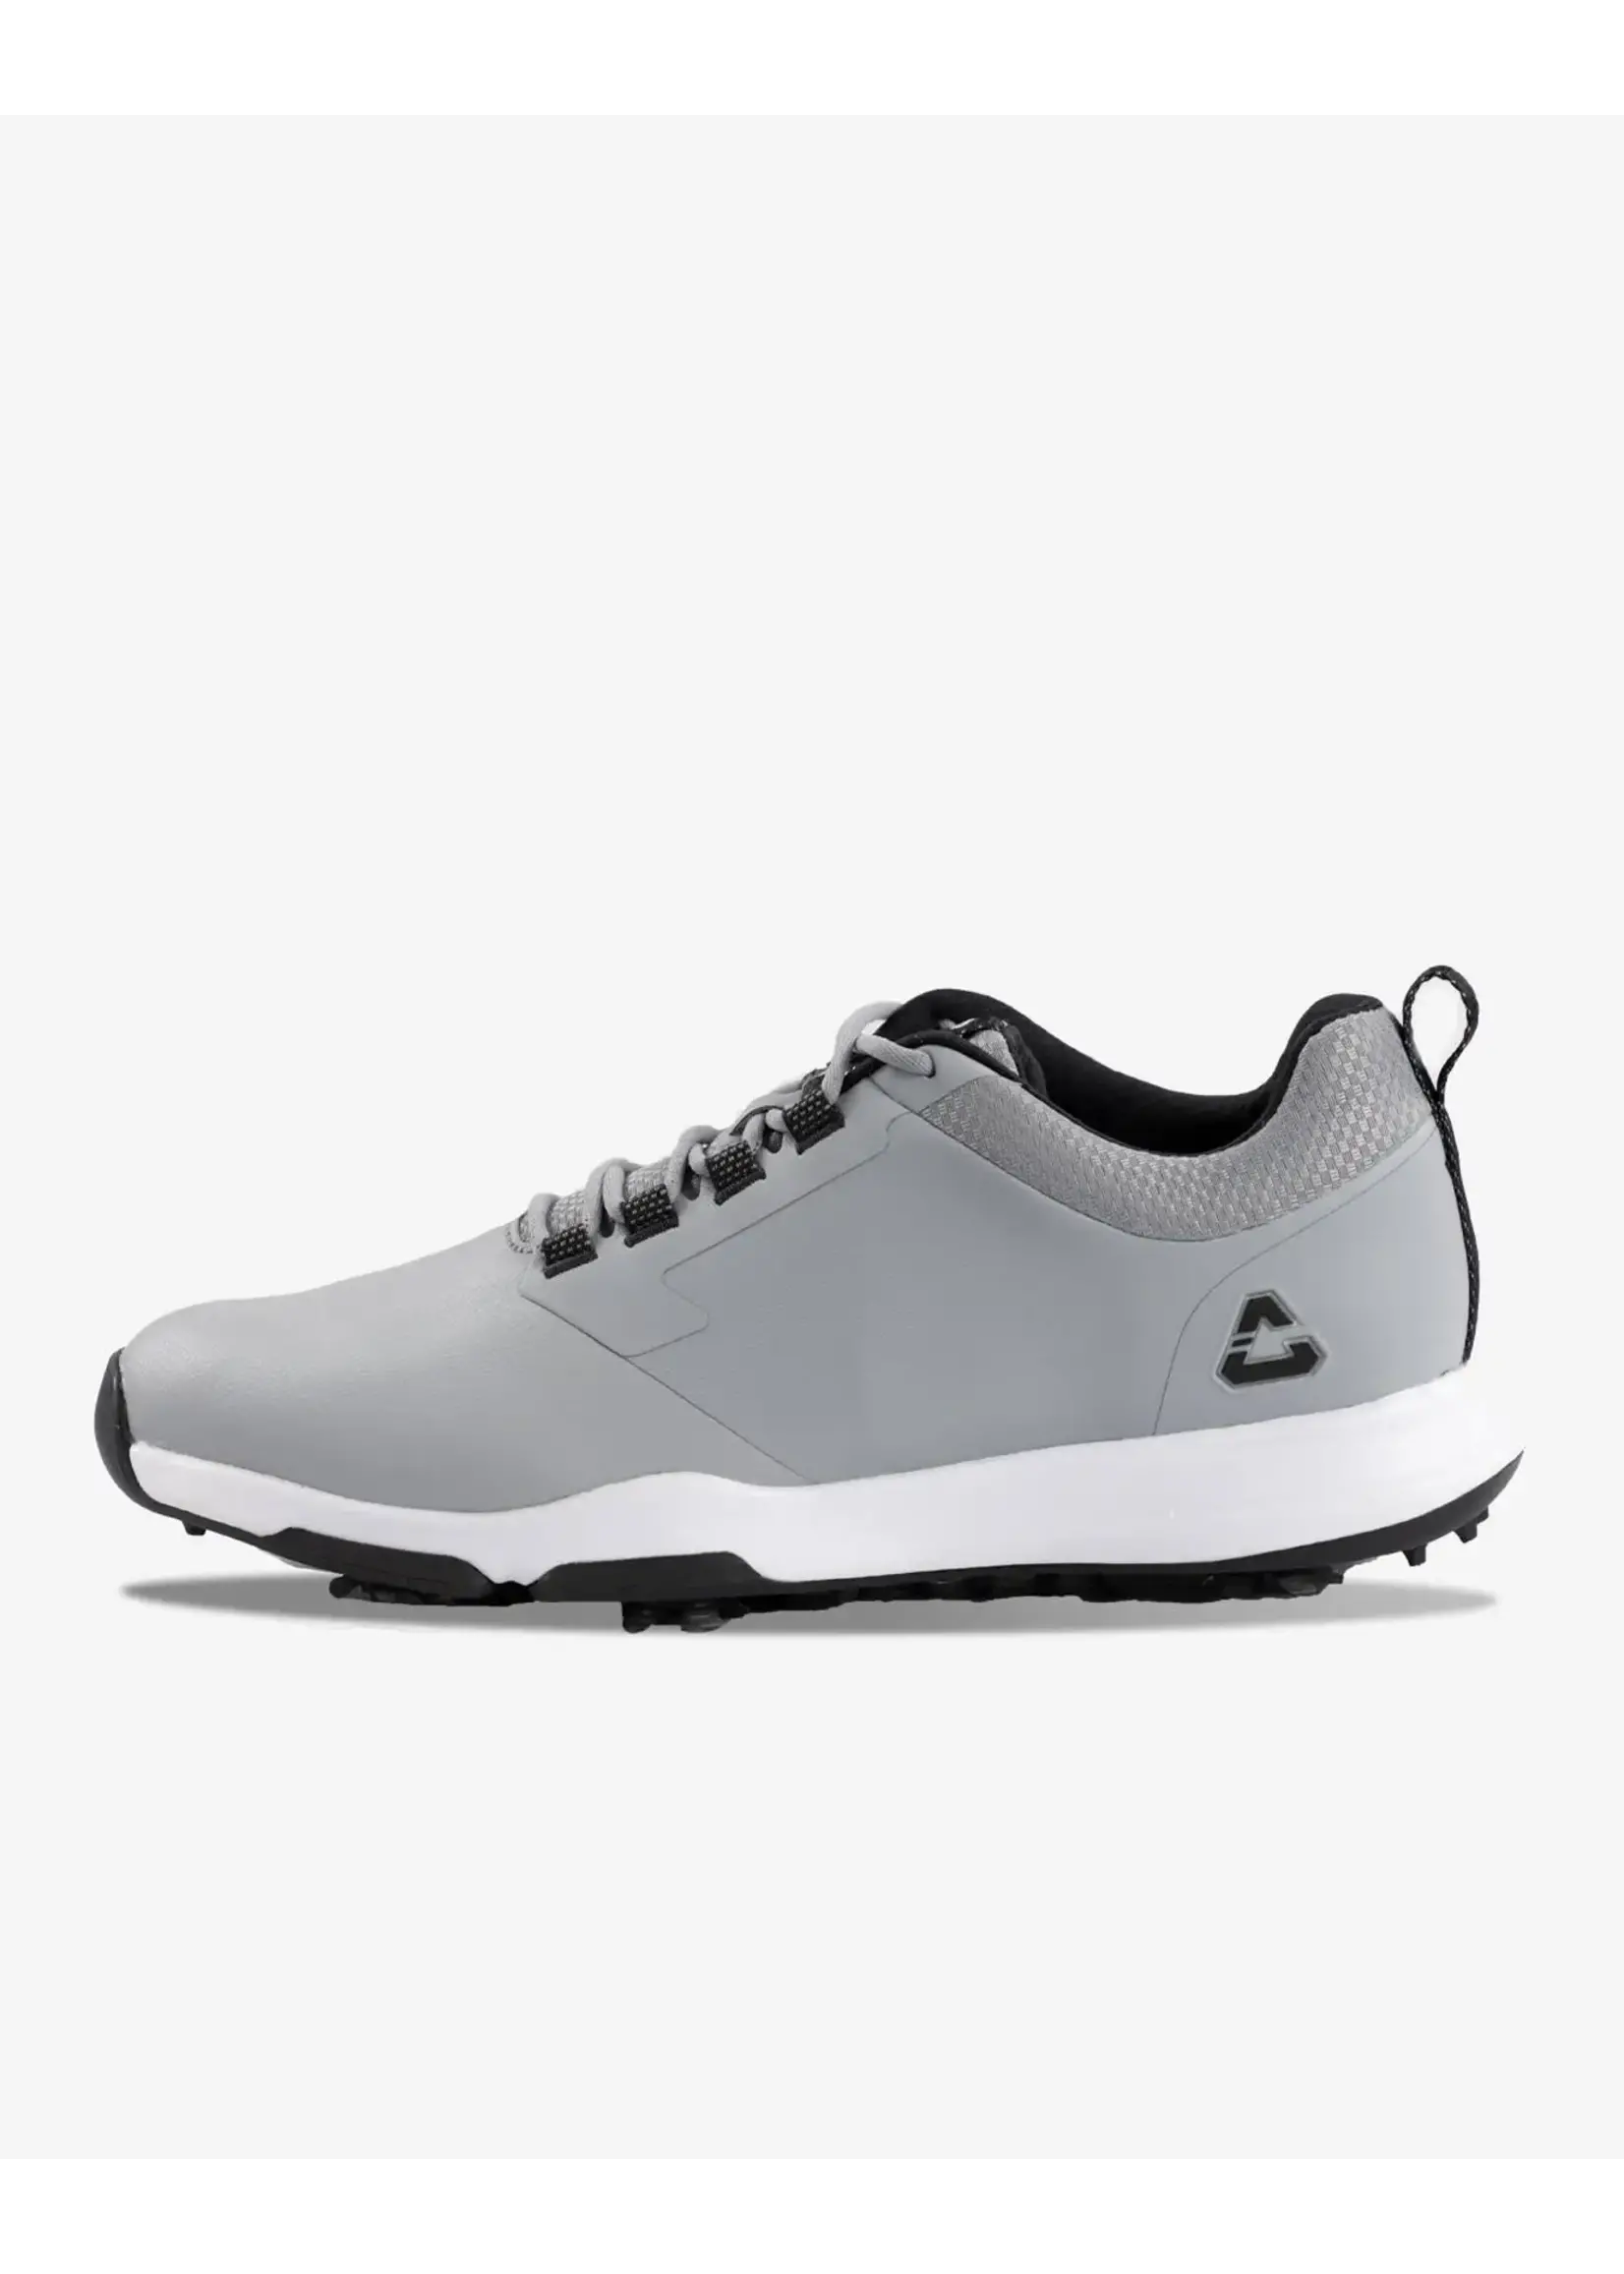 Cuater The Ringer Golf Shoe